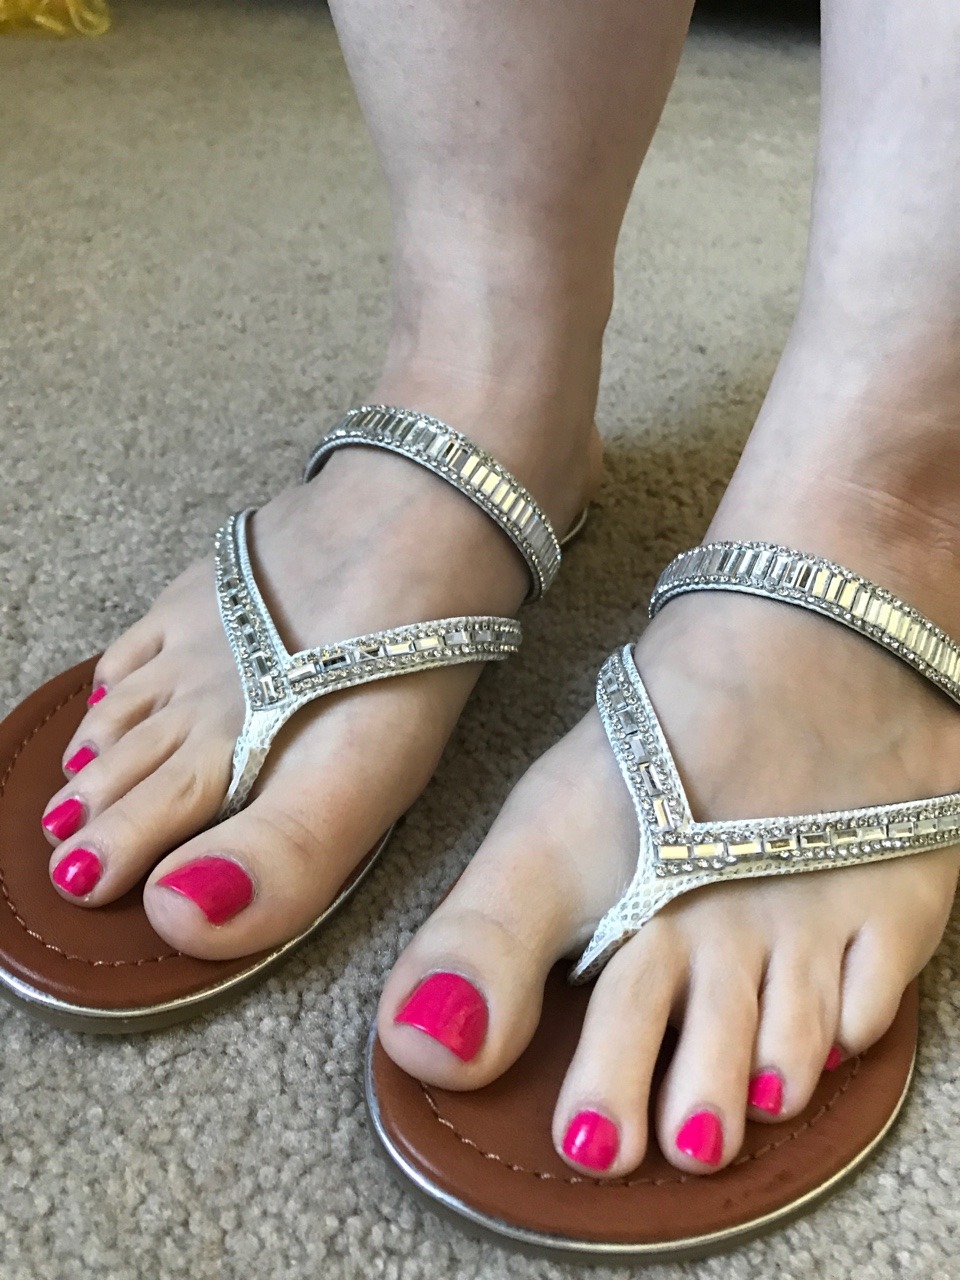 kissabletoes:  I’ve been having hubby spoil the hell out of me and treat me like